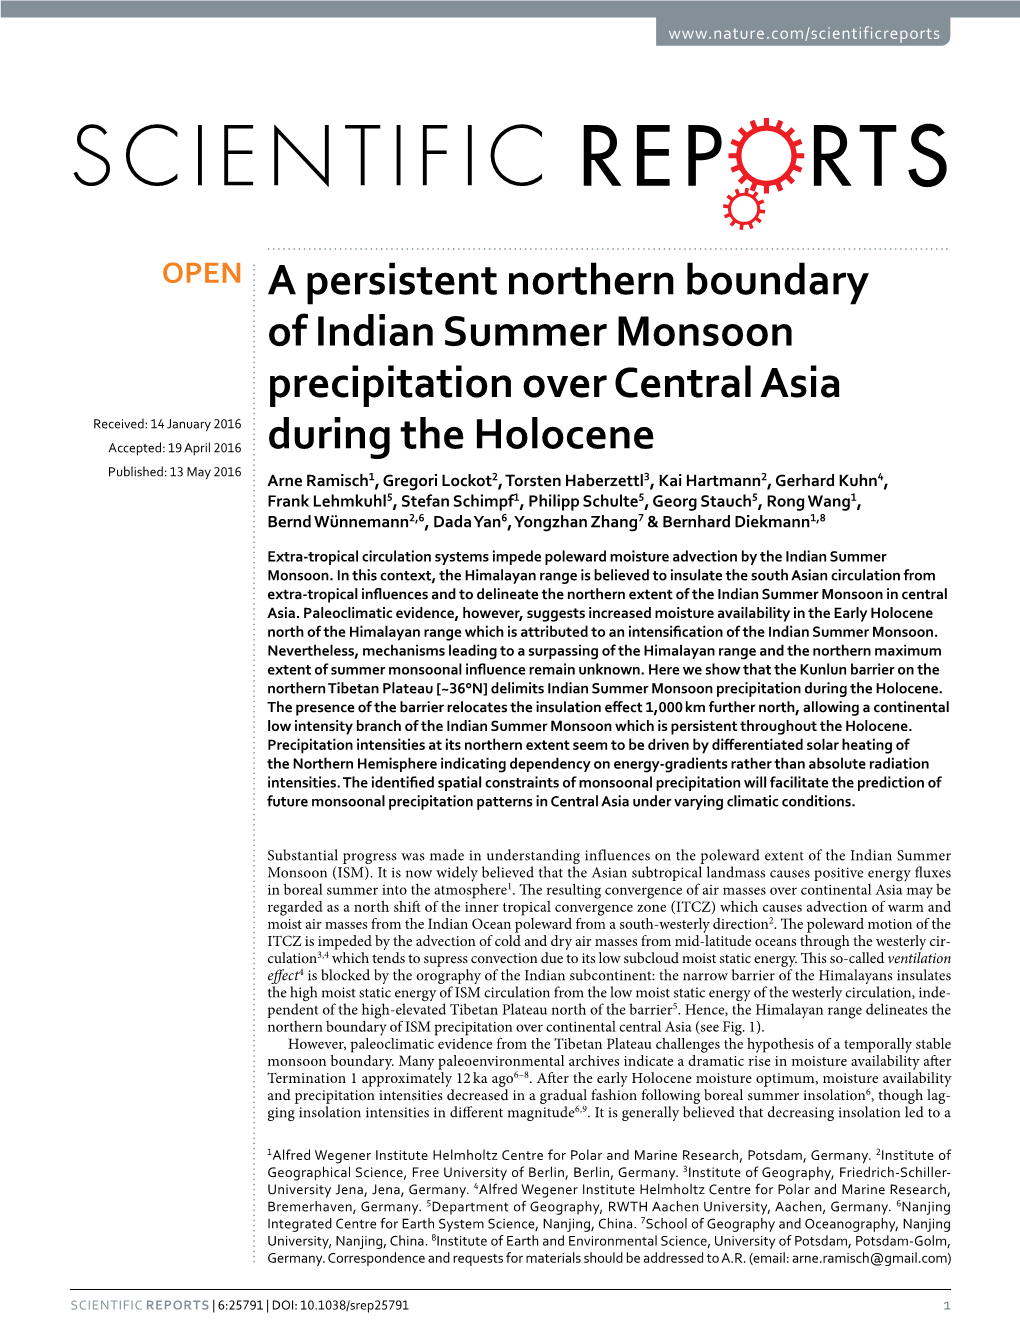 A Persistent Northern Boundary of Indian Summer Monsoon